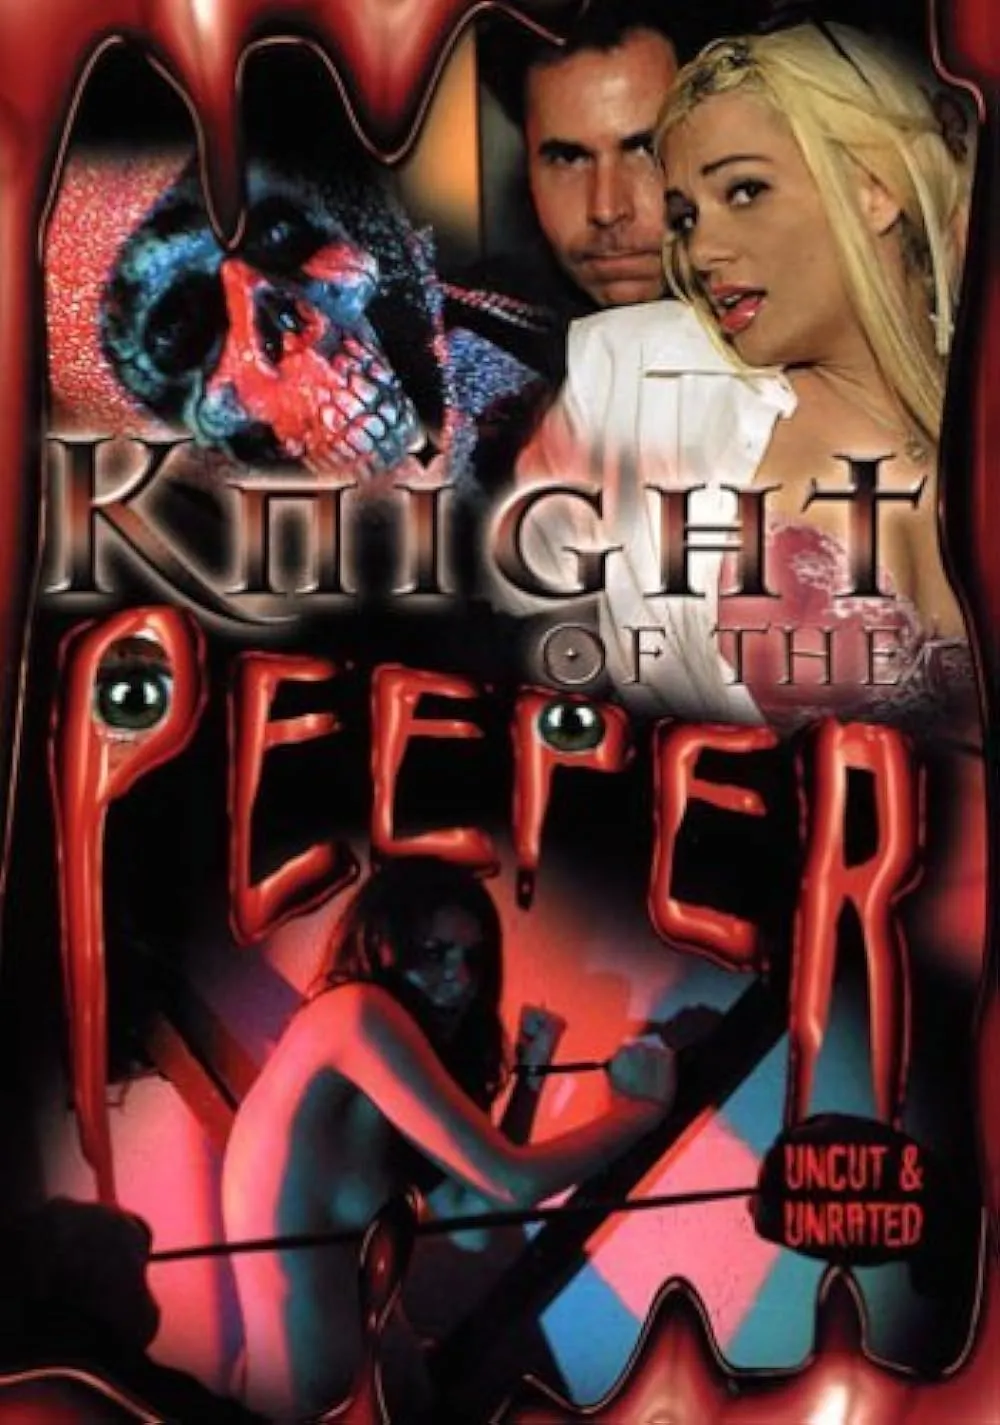 18+ Knight of the Peeper 2006 English 480p HDRip 300MB Download